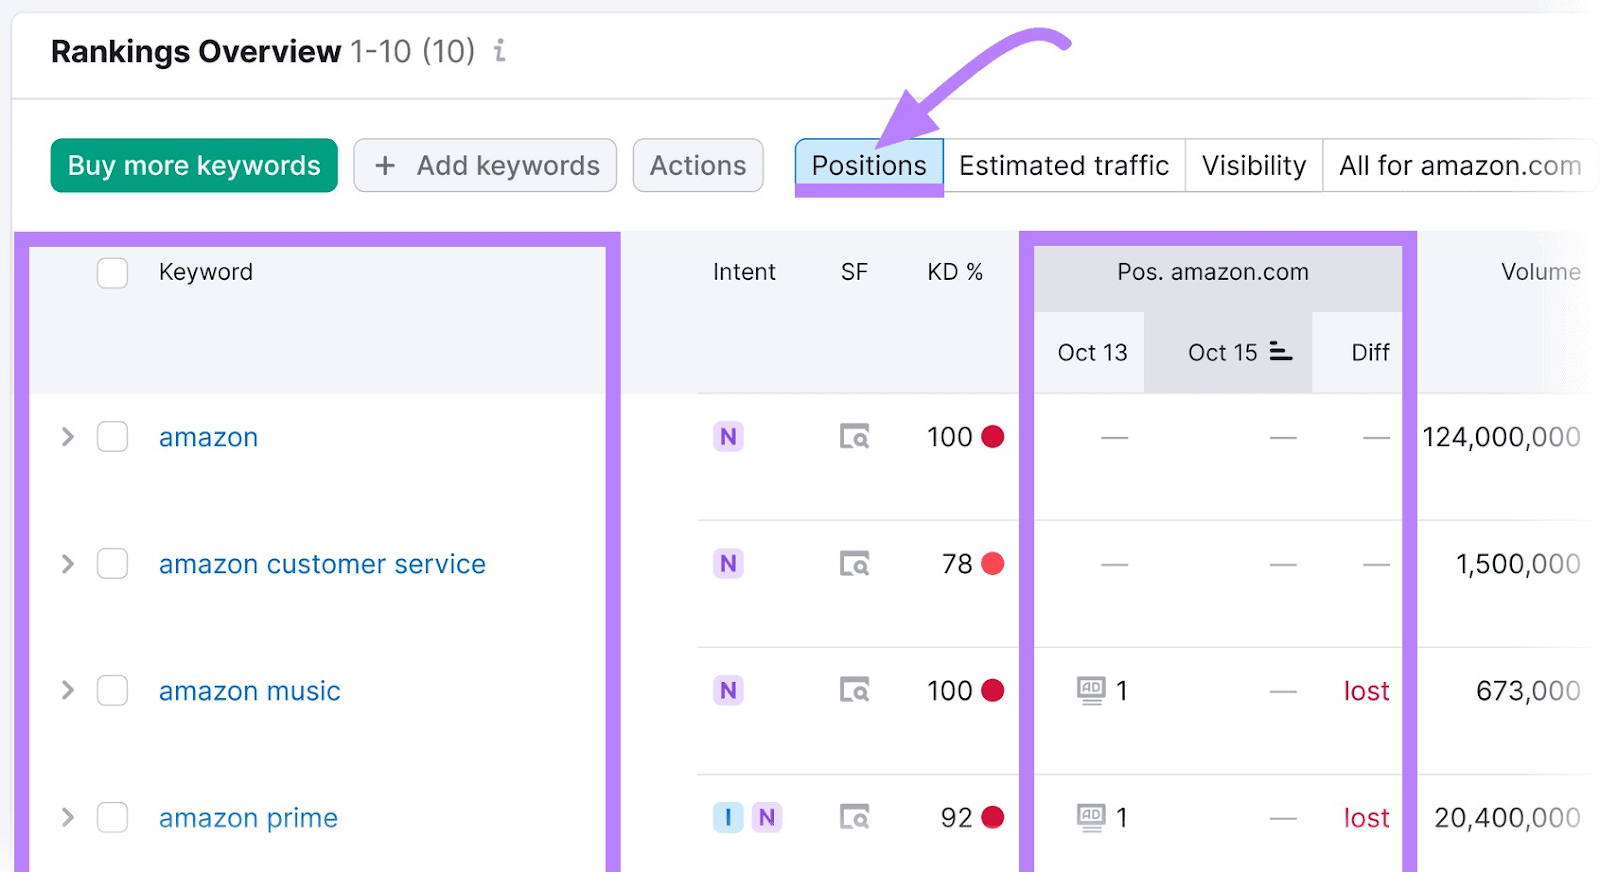 “Rankings Overview” section shows which keywords your ads are ranking for and their ranking position